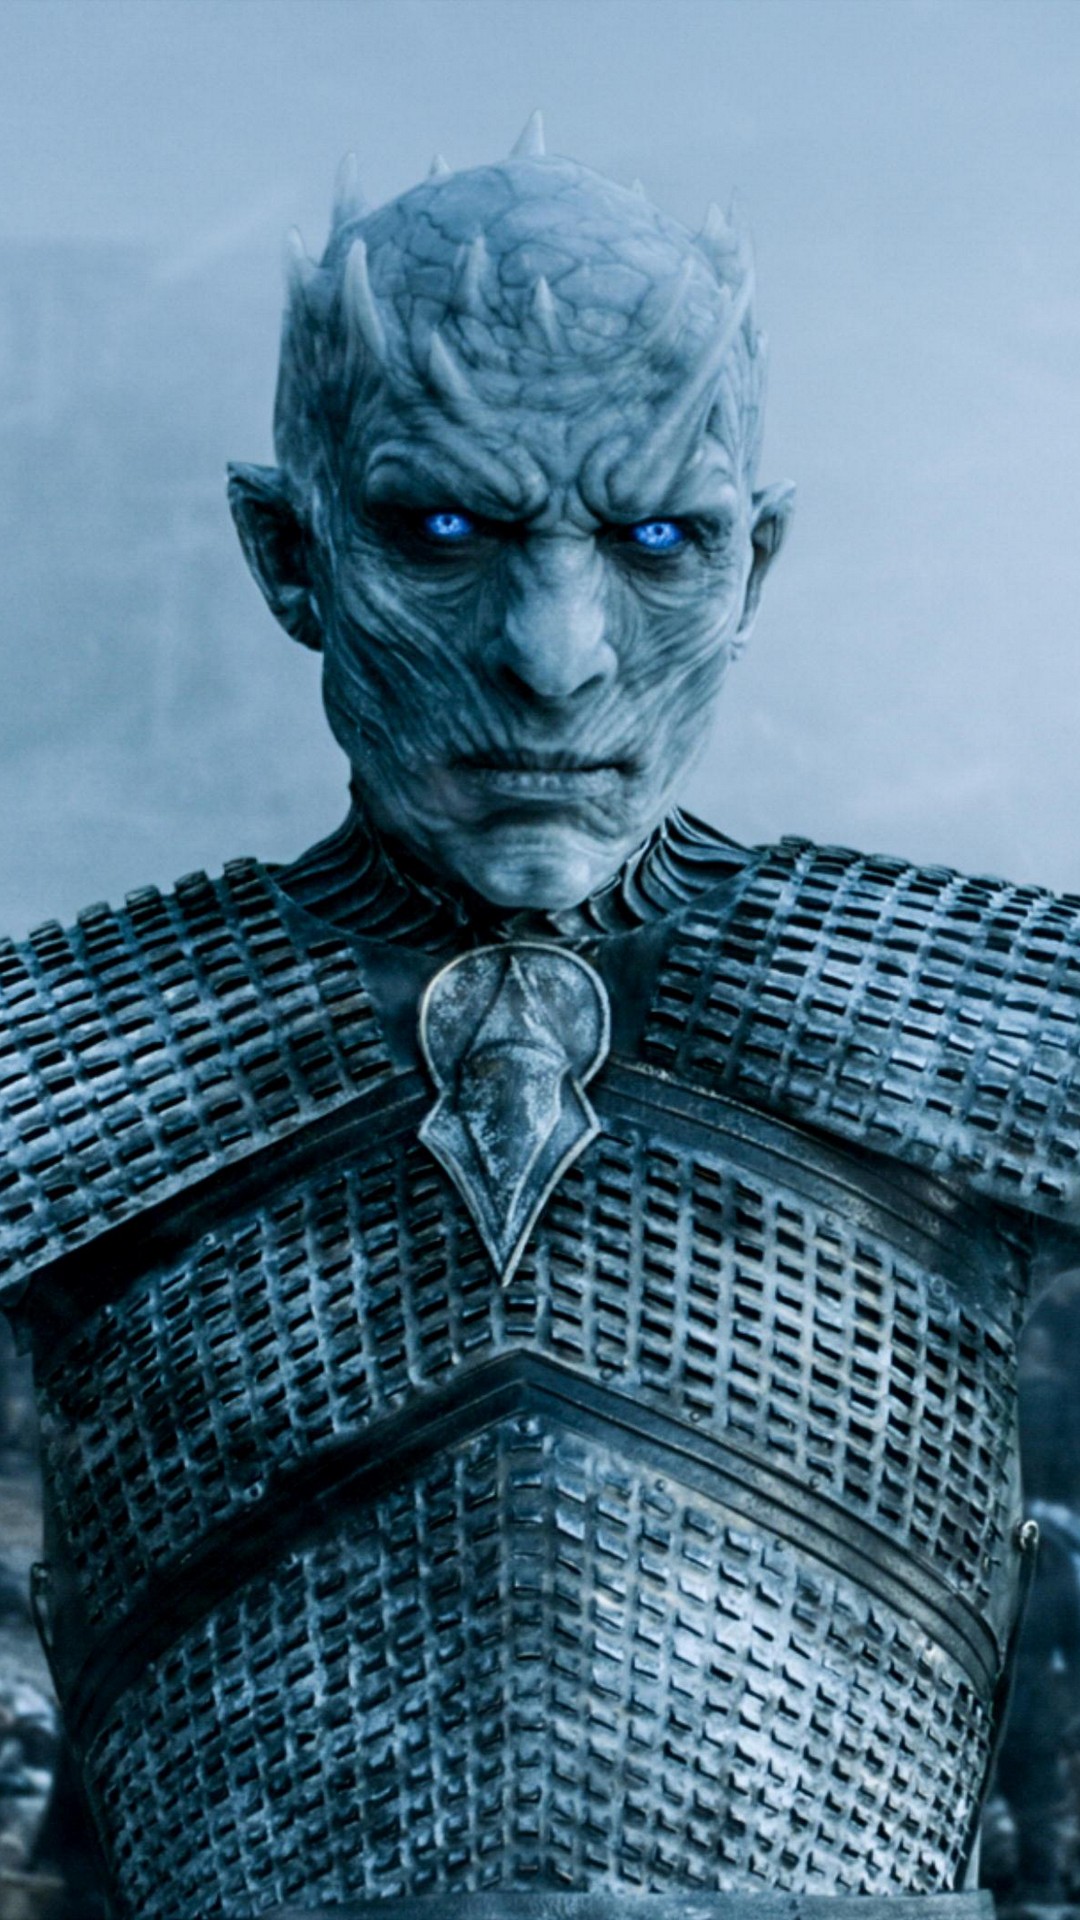 Night King Game of Thrones iPhone Wallpaper With high-resolution 1080X1920 pixel. You can use this wallpaper for your iPhone 5, 6, 7, 8, X, XS, XR backgrounds, Mobile Screensaver, or iPad Lock Screen